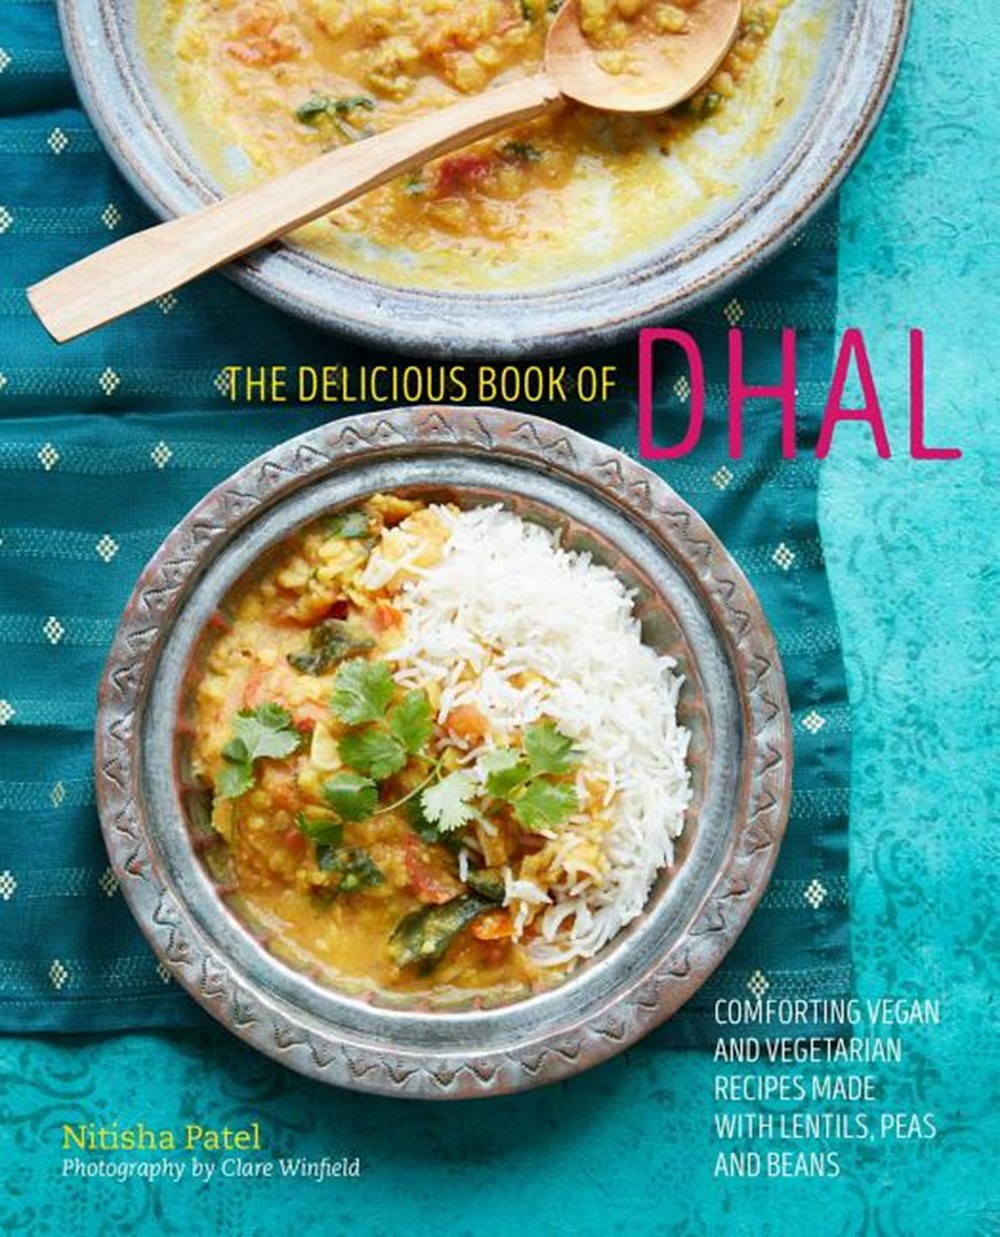 Delicious Book of Dhal Comforting Vegan and Vegetarian Recipes Made with Lentils, Peas and Beans